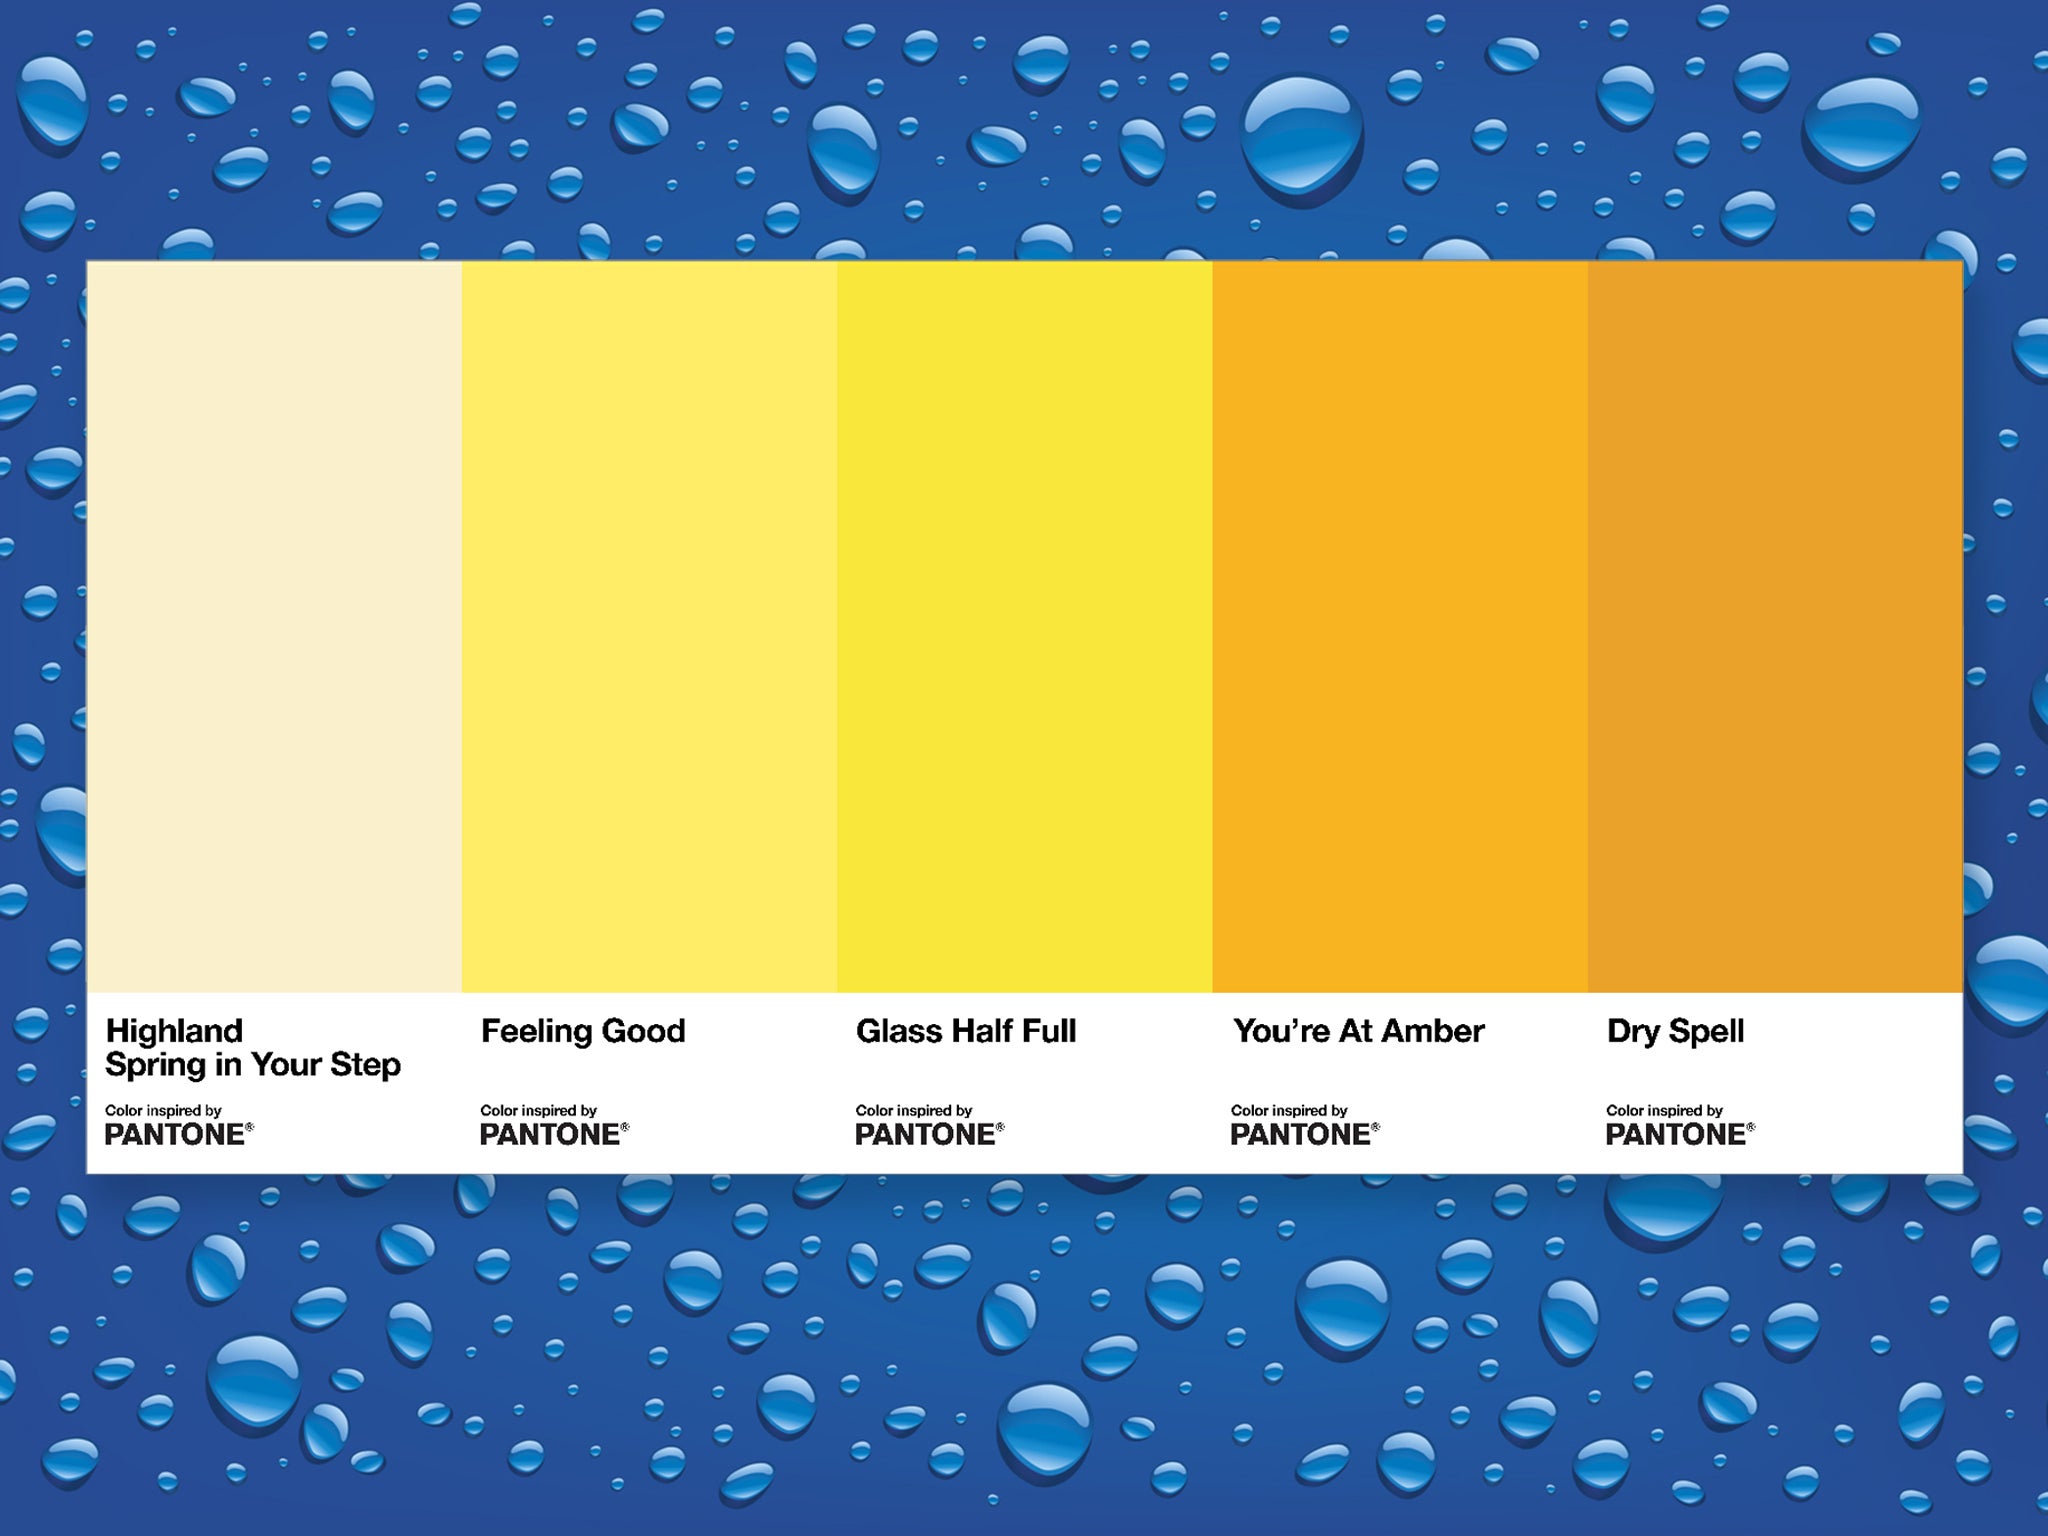 Different Colours Of Urine And Their Meaning